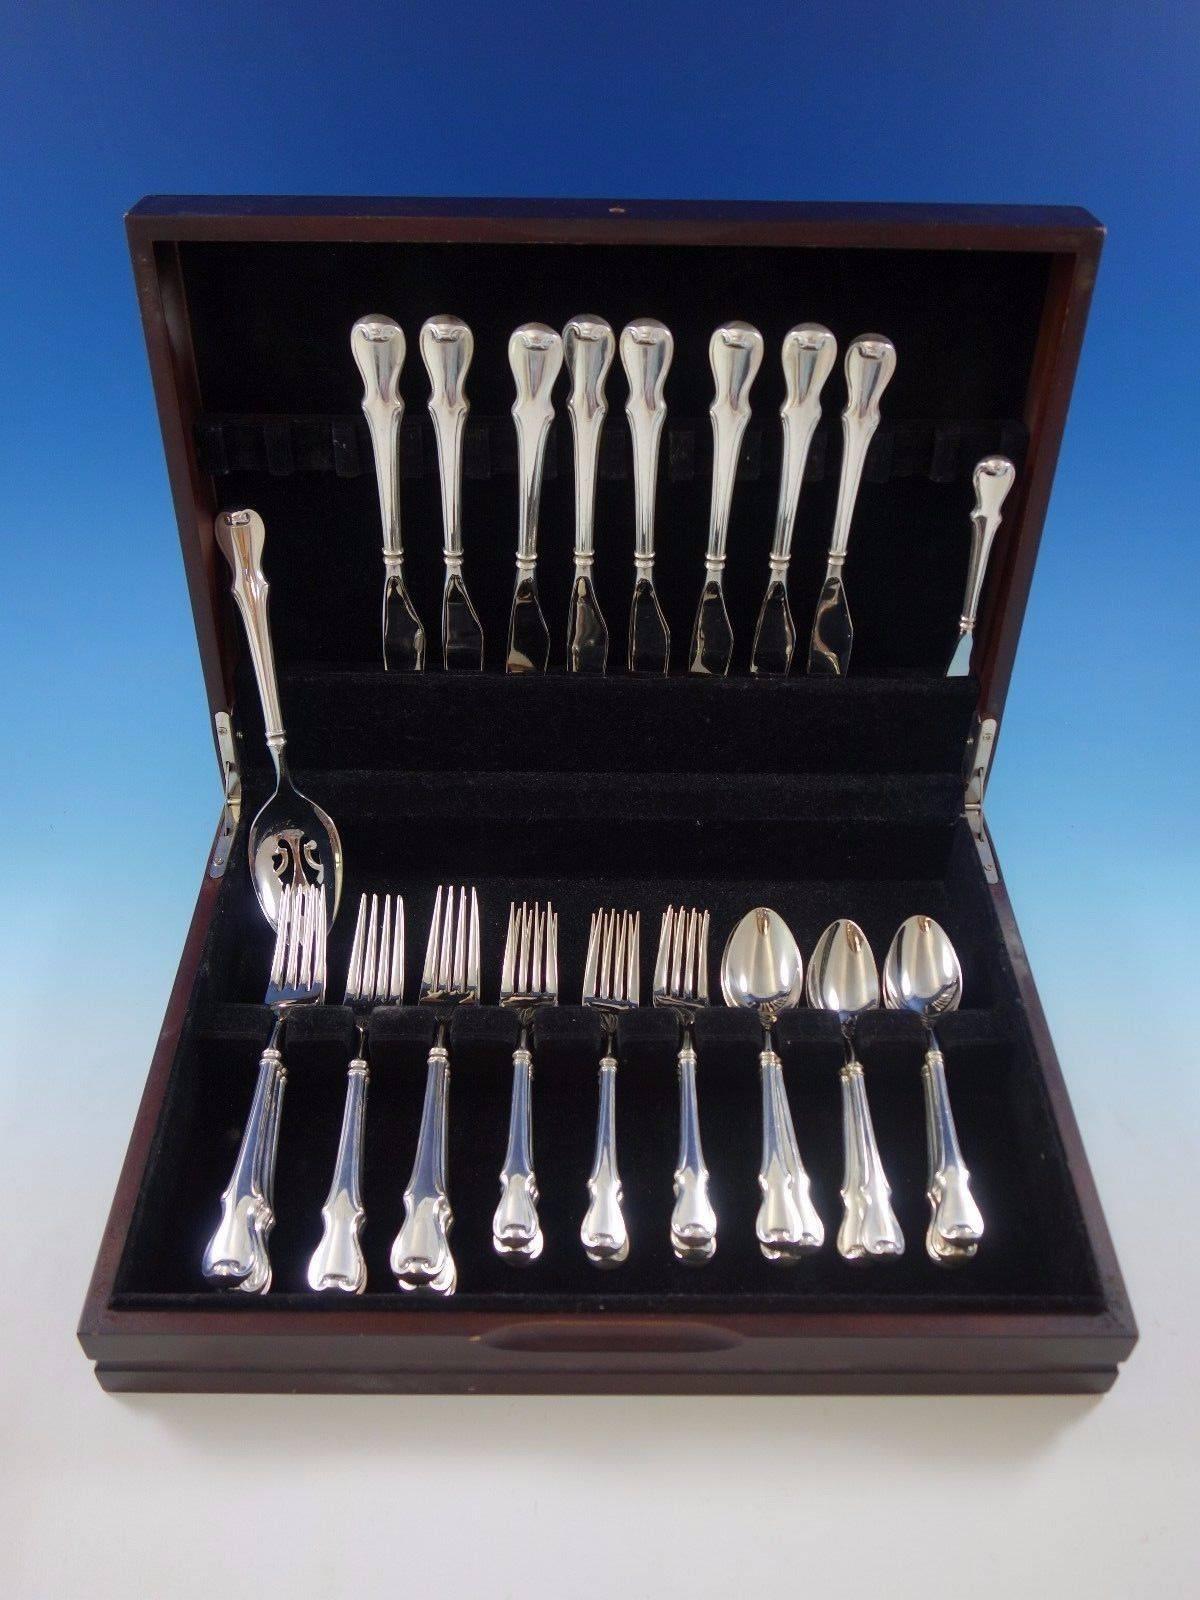 Plymouth Colony by Wallace sterling silver Flatware set, 34 pieces. All pieces in this set have sterling silver hollow handles with stainless ends. This set includes: 

Eight knives, 8 7/8